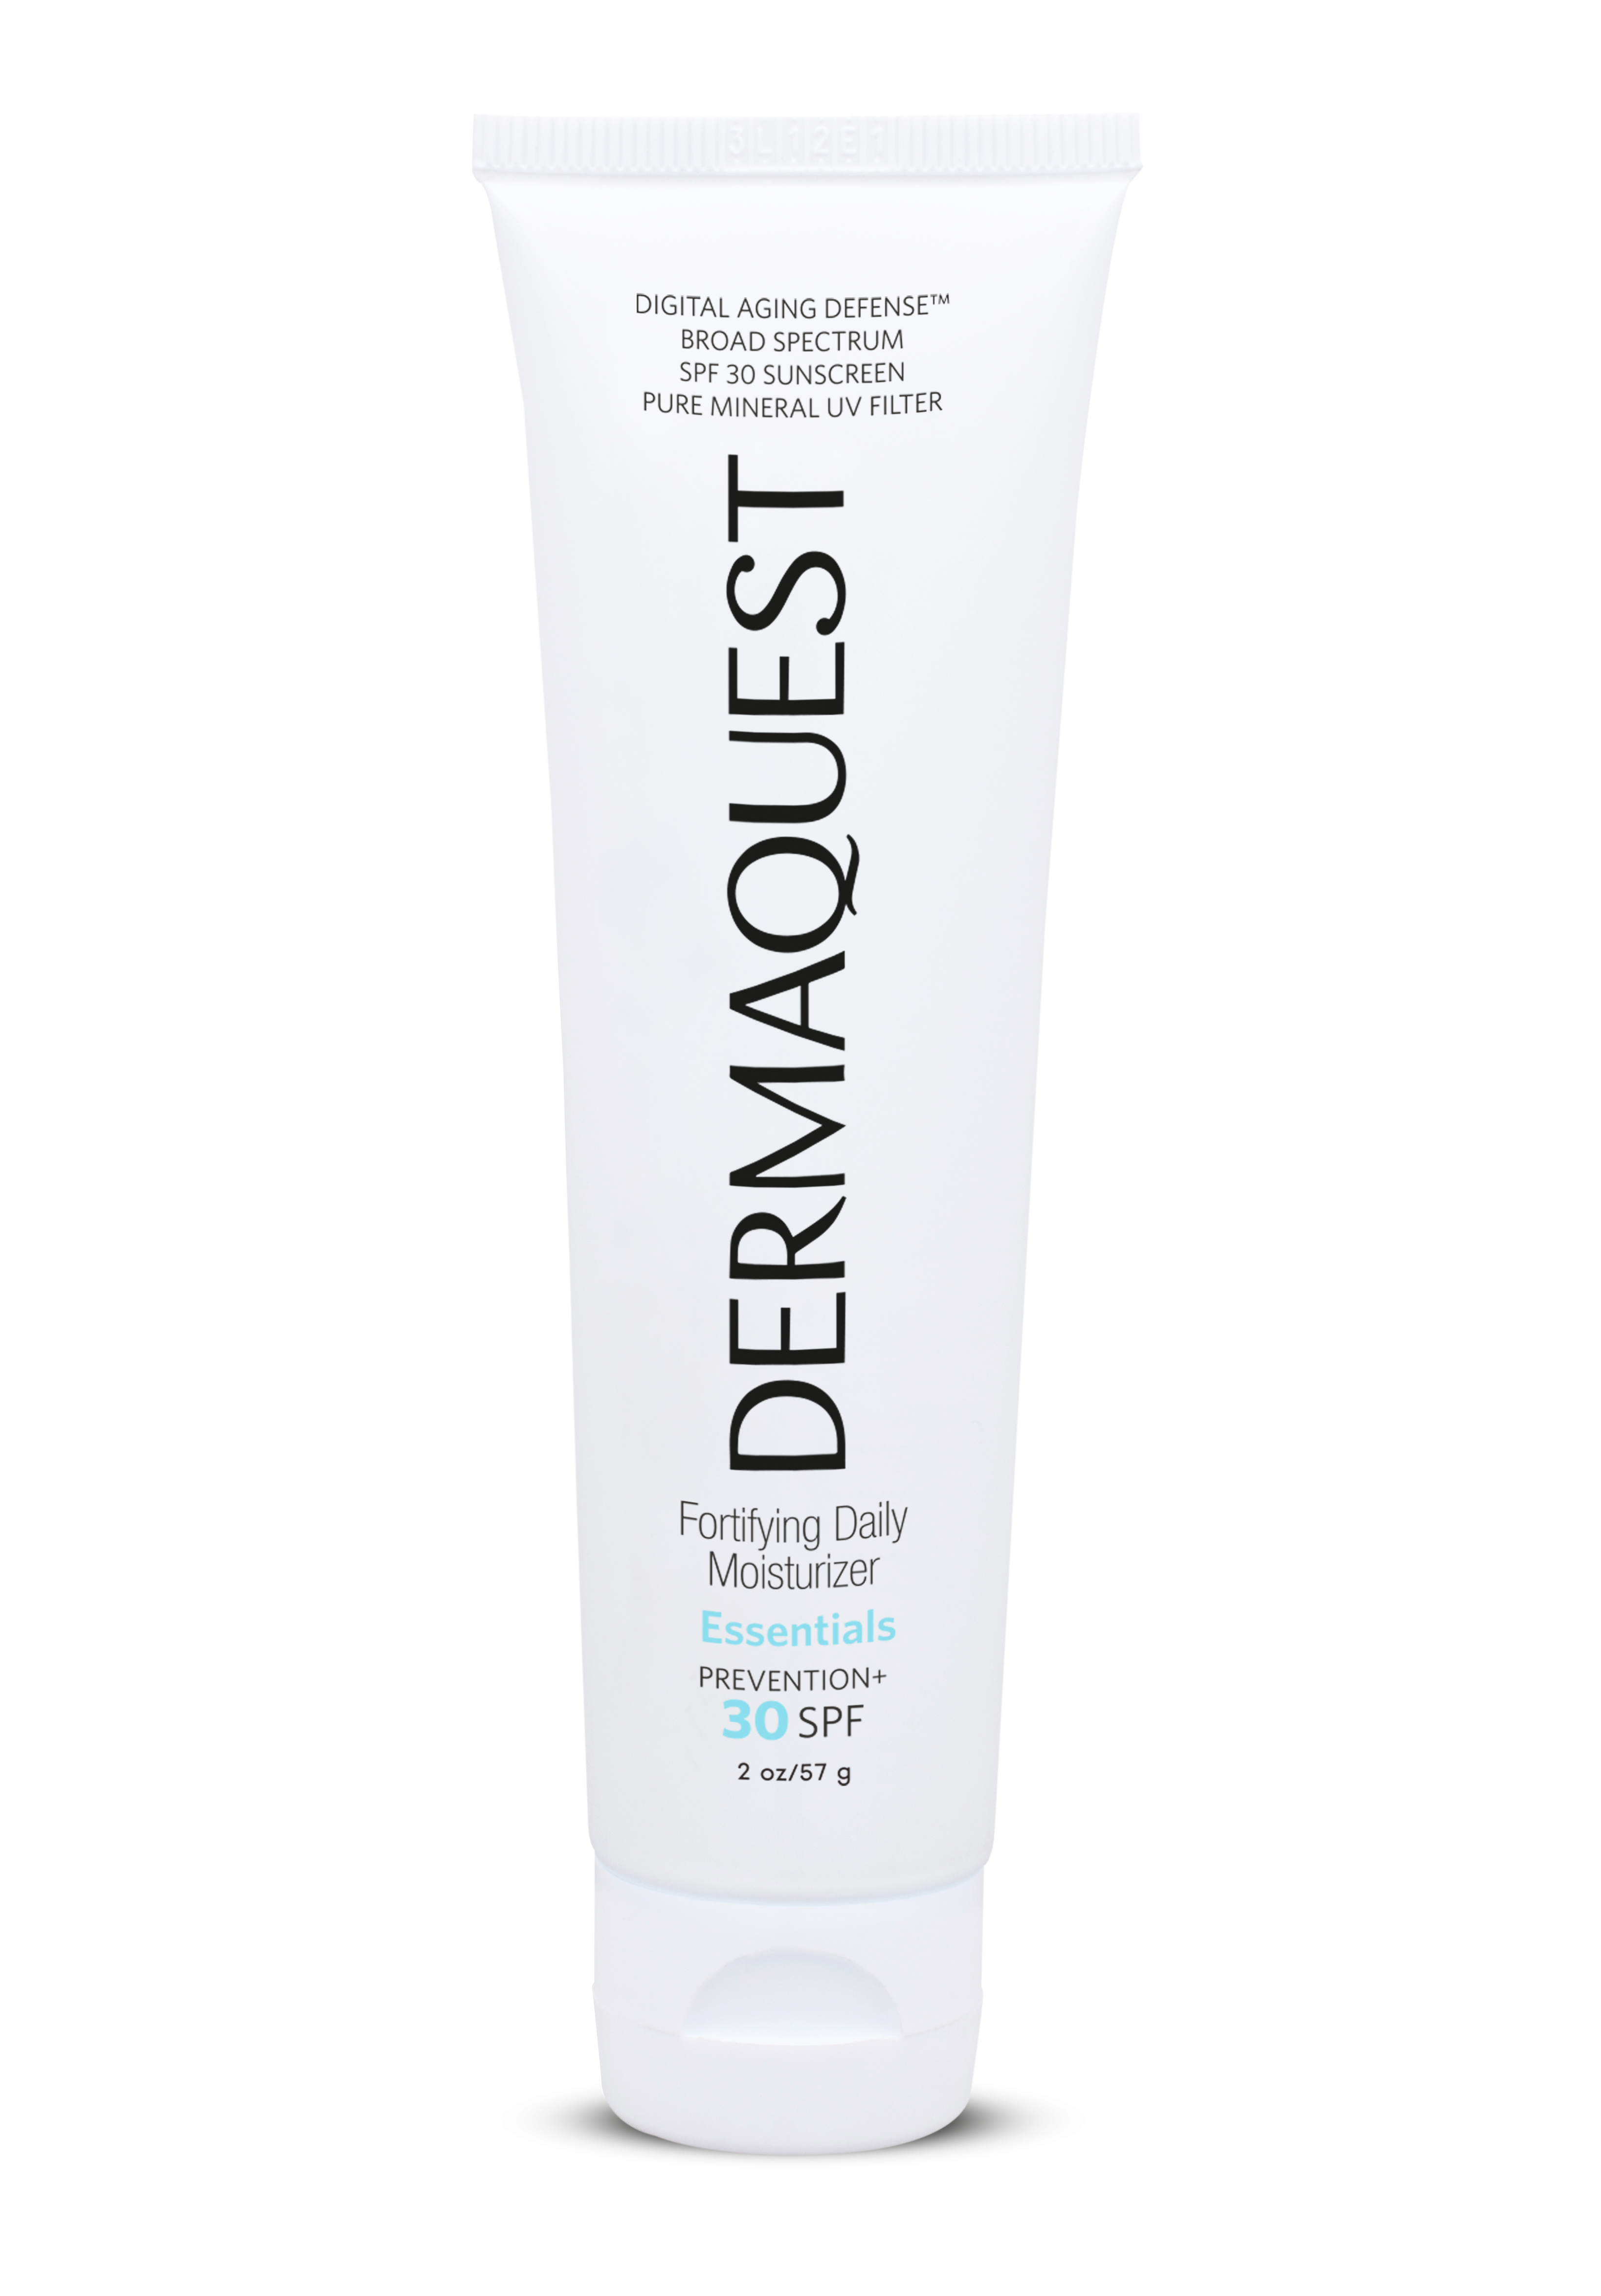 Fortifying Daily Moisturizer PREVENTION + 30 SPF